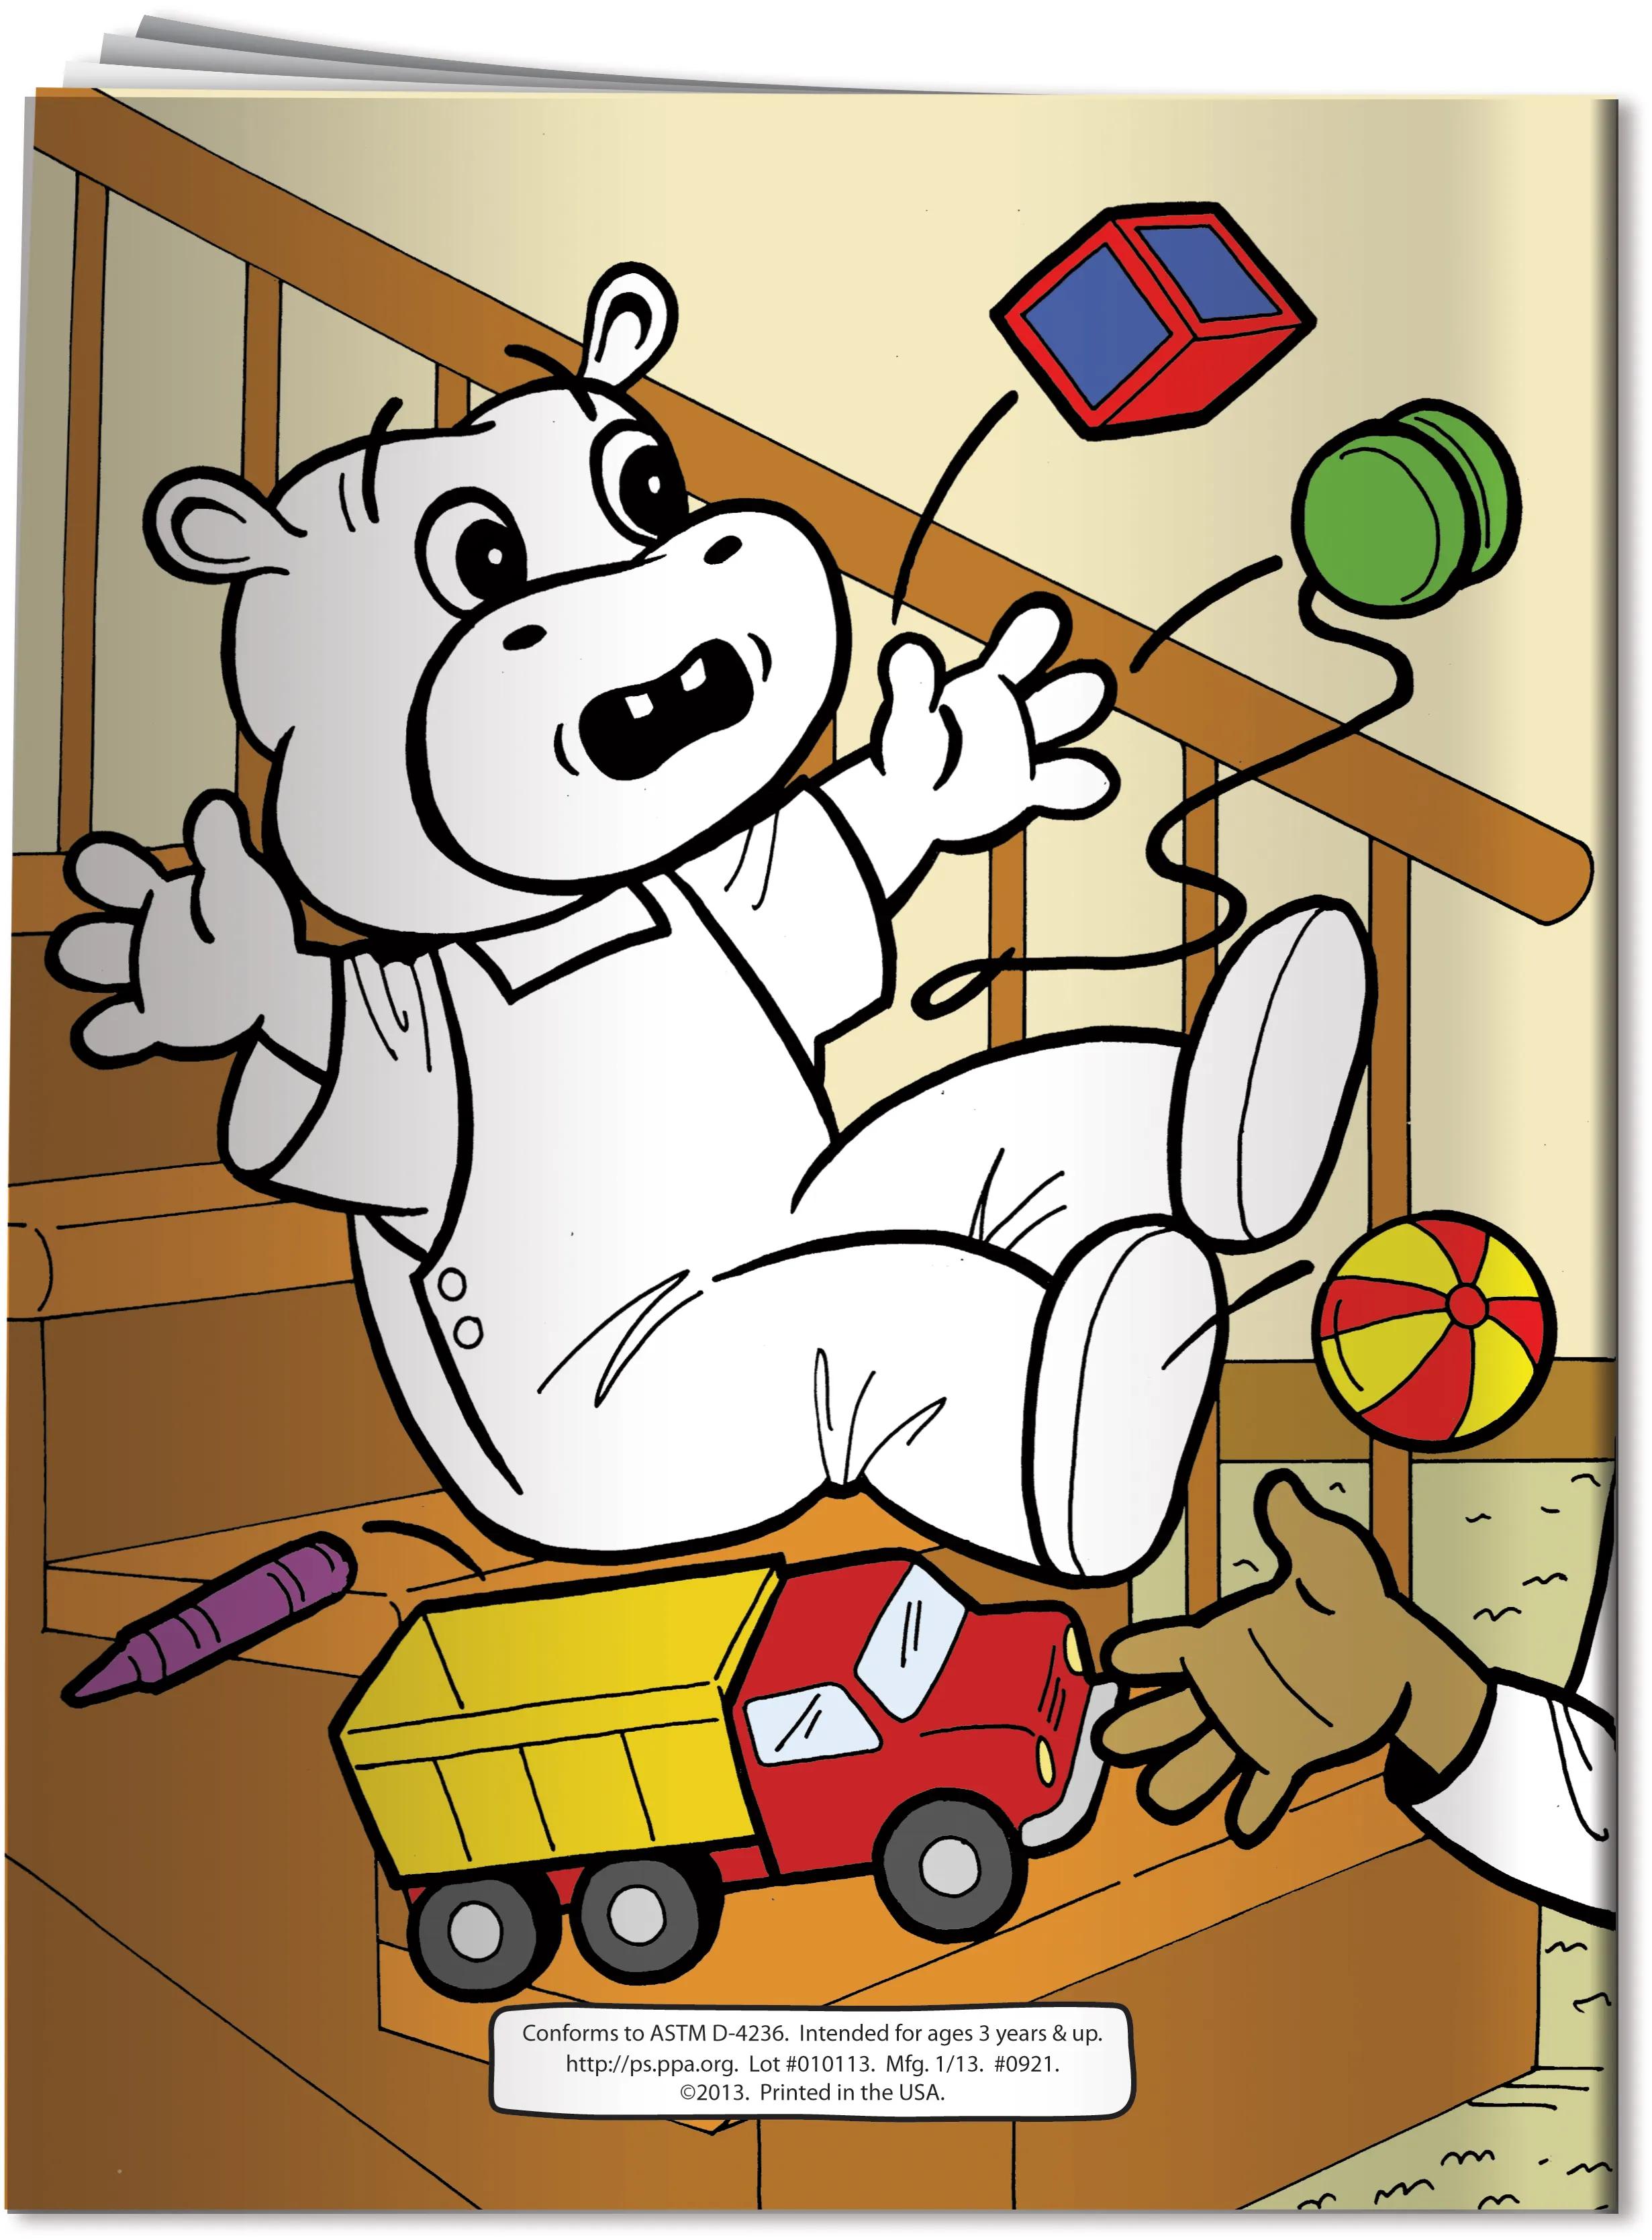 Coloring Book: Home Safety 2 of 4